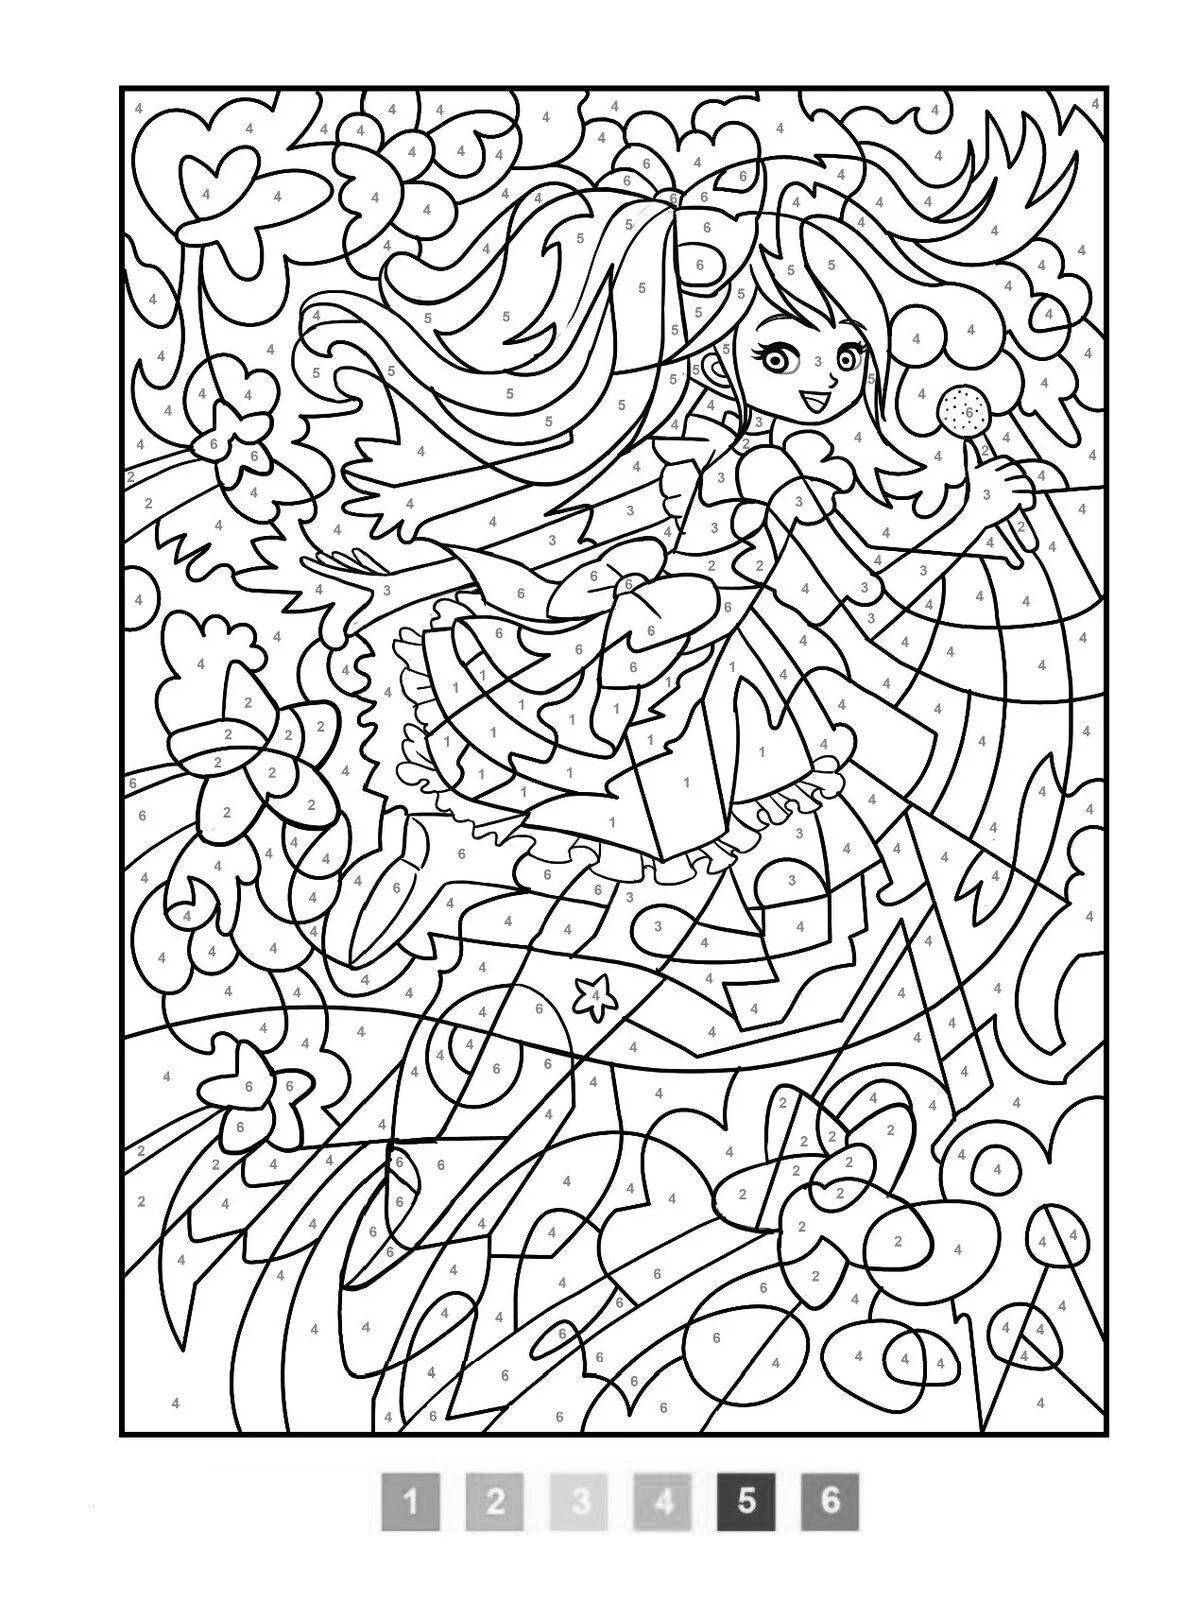 Mystical coloring by numbers on the phone